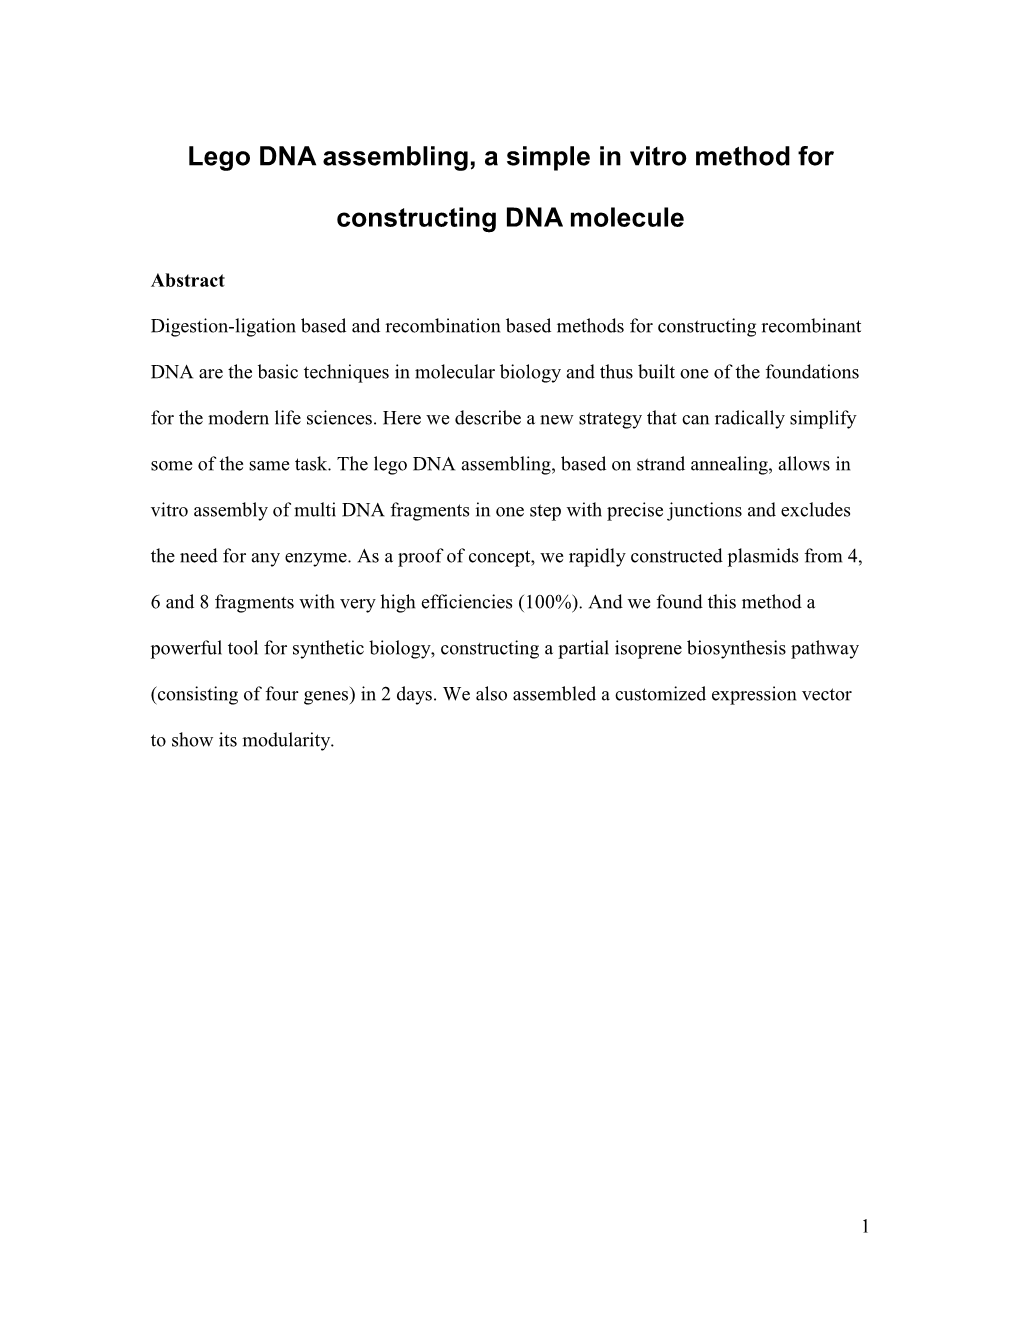 Lego DNA Assembling, a Simple in Vitro Method for Constructing DNA